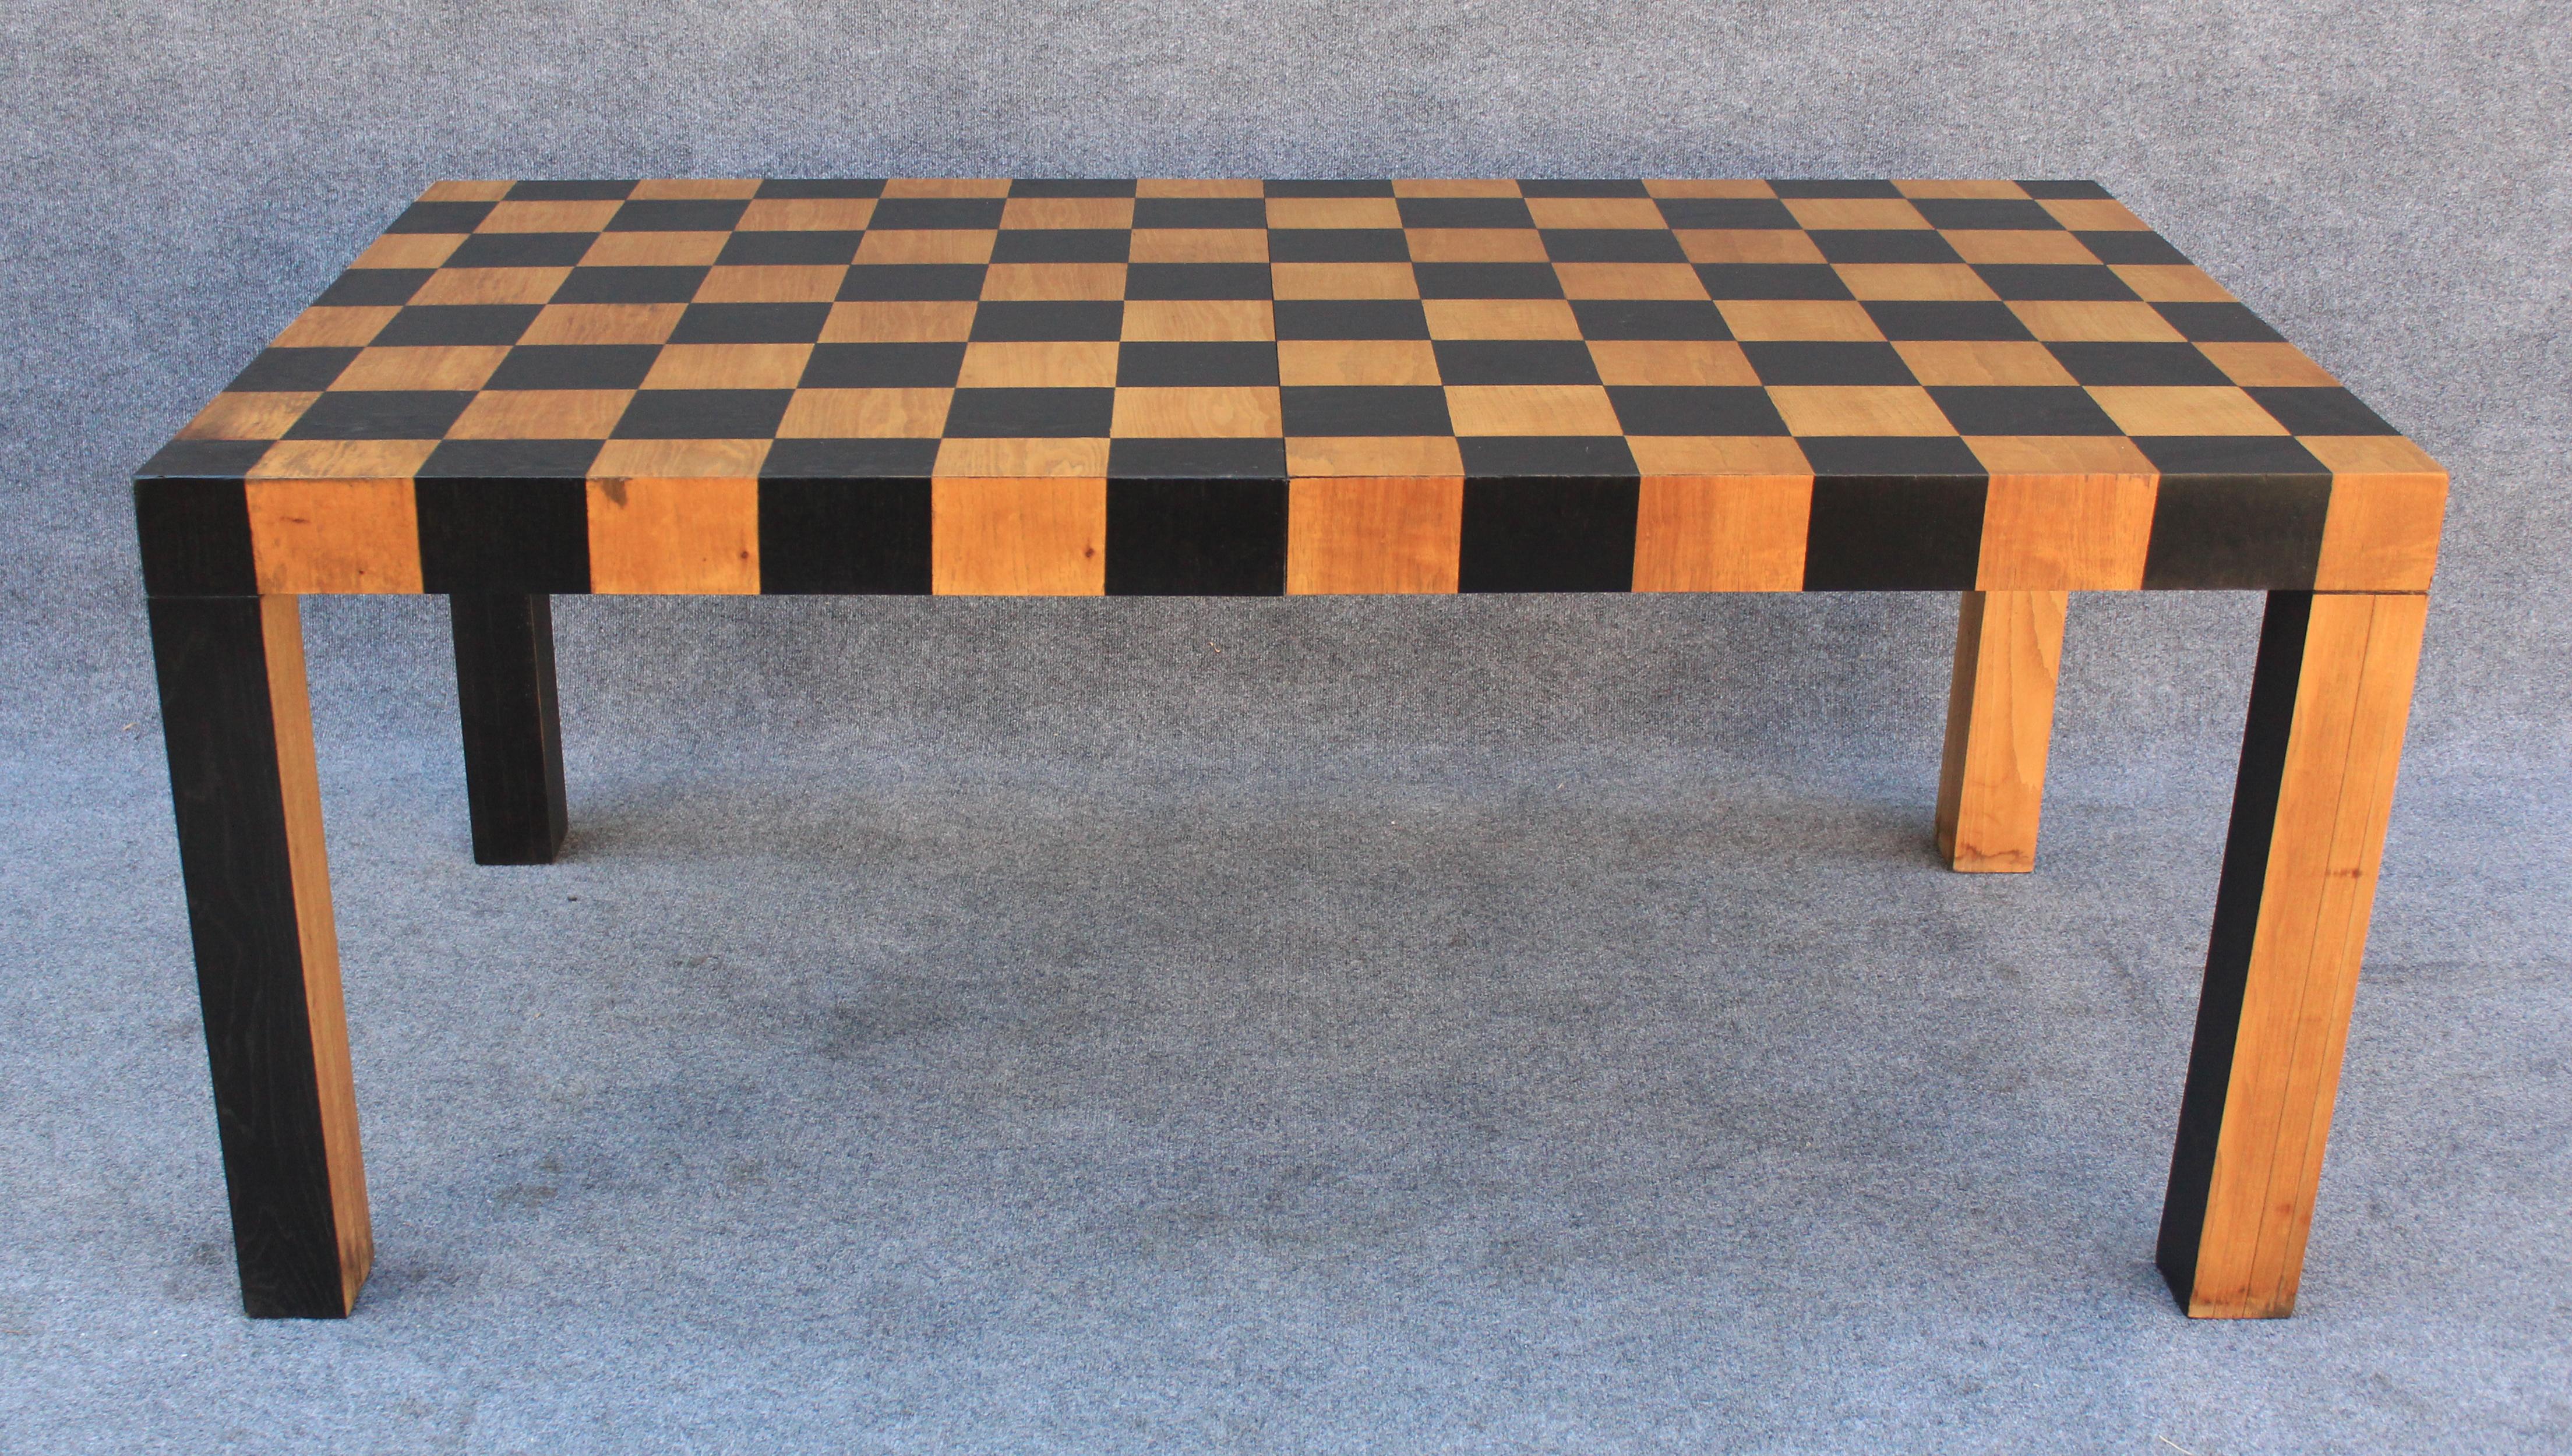 Made towards the late 1970s, this table was manufactured to the exacting standards known of Lane furniture in a style similar to the popular Milo Baughman tables. The entire table is clad in an 8 x 14 grid of walnut squares, with an additional 8 x 4